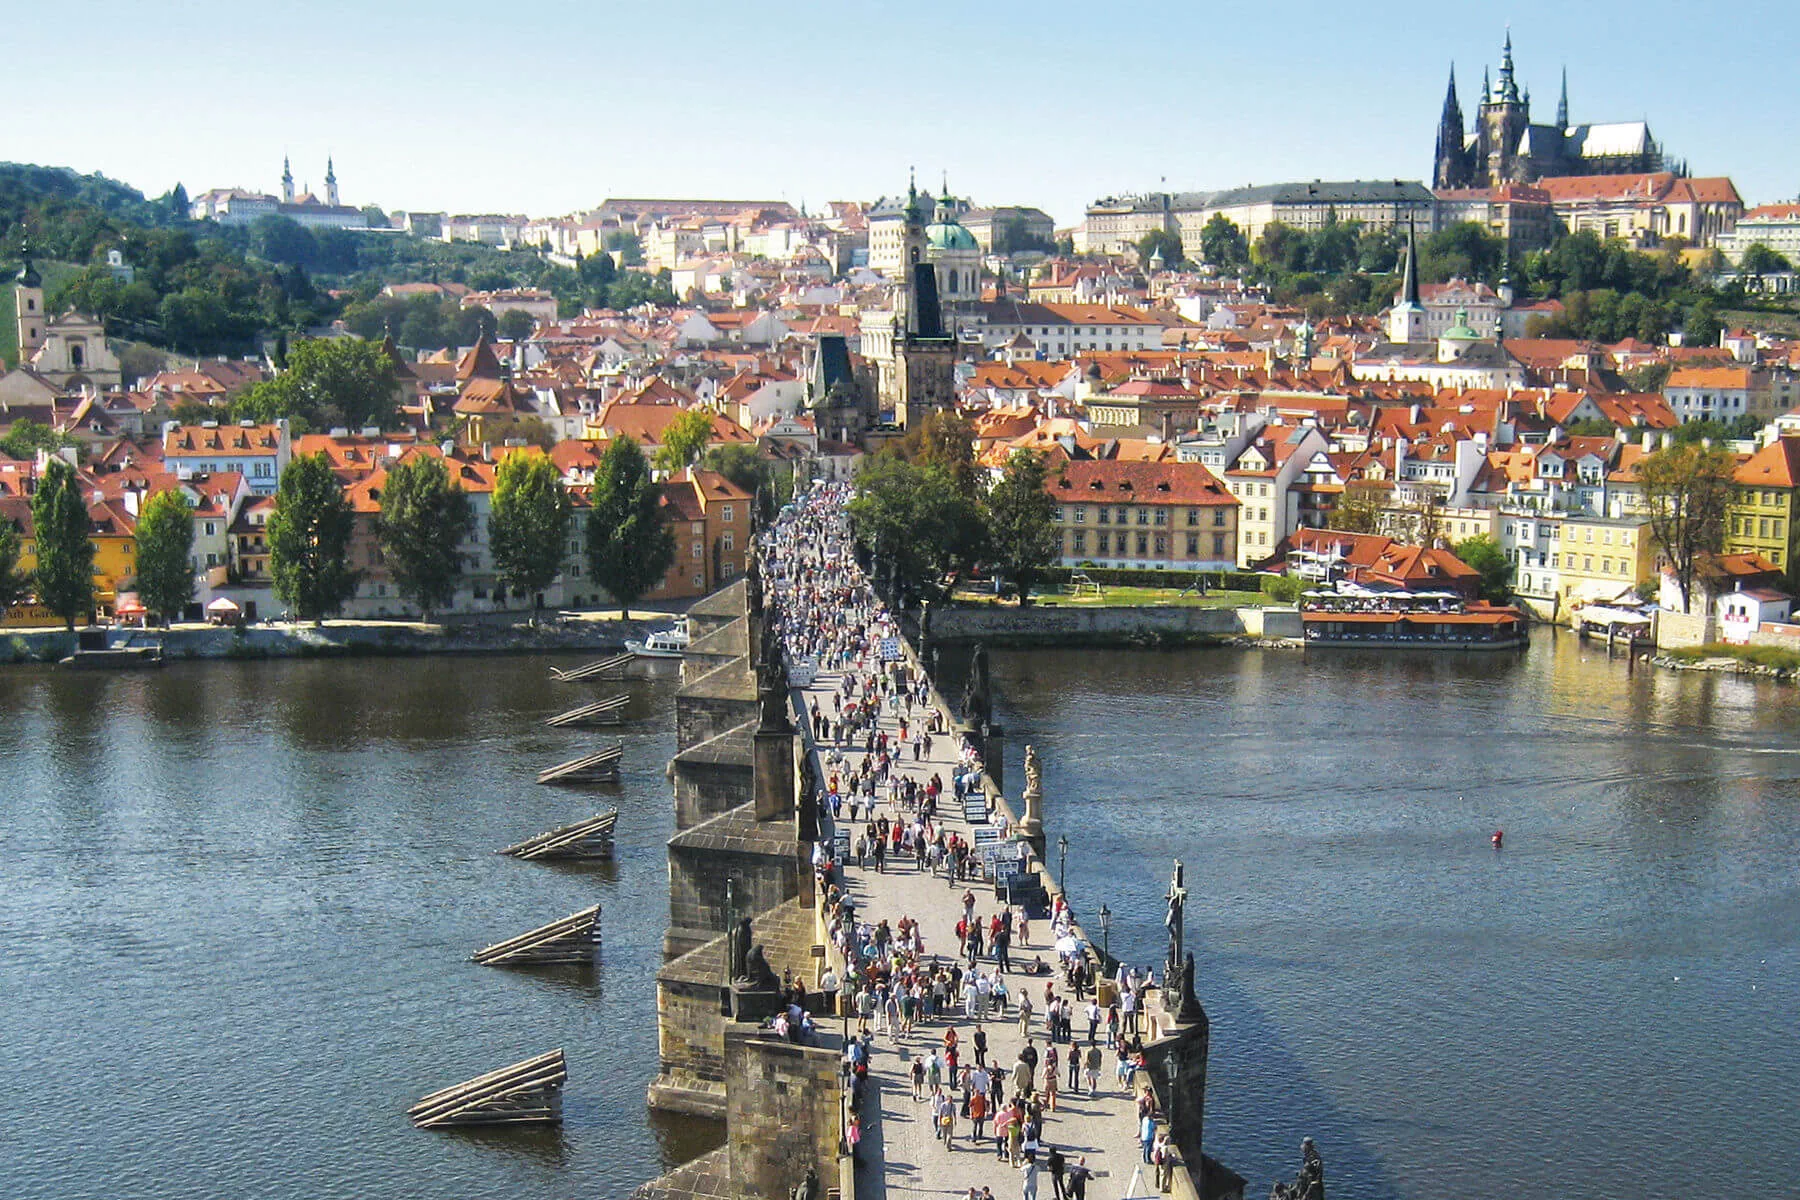 One of my favorite places for a stroll, the Charles Bridge in Prague is a celebration of color and life